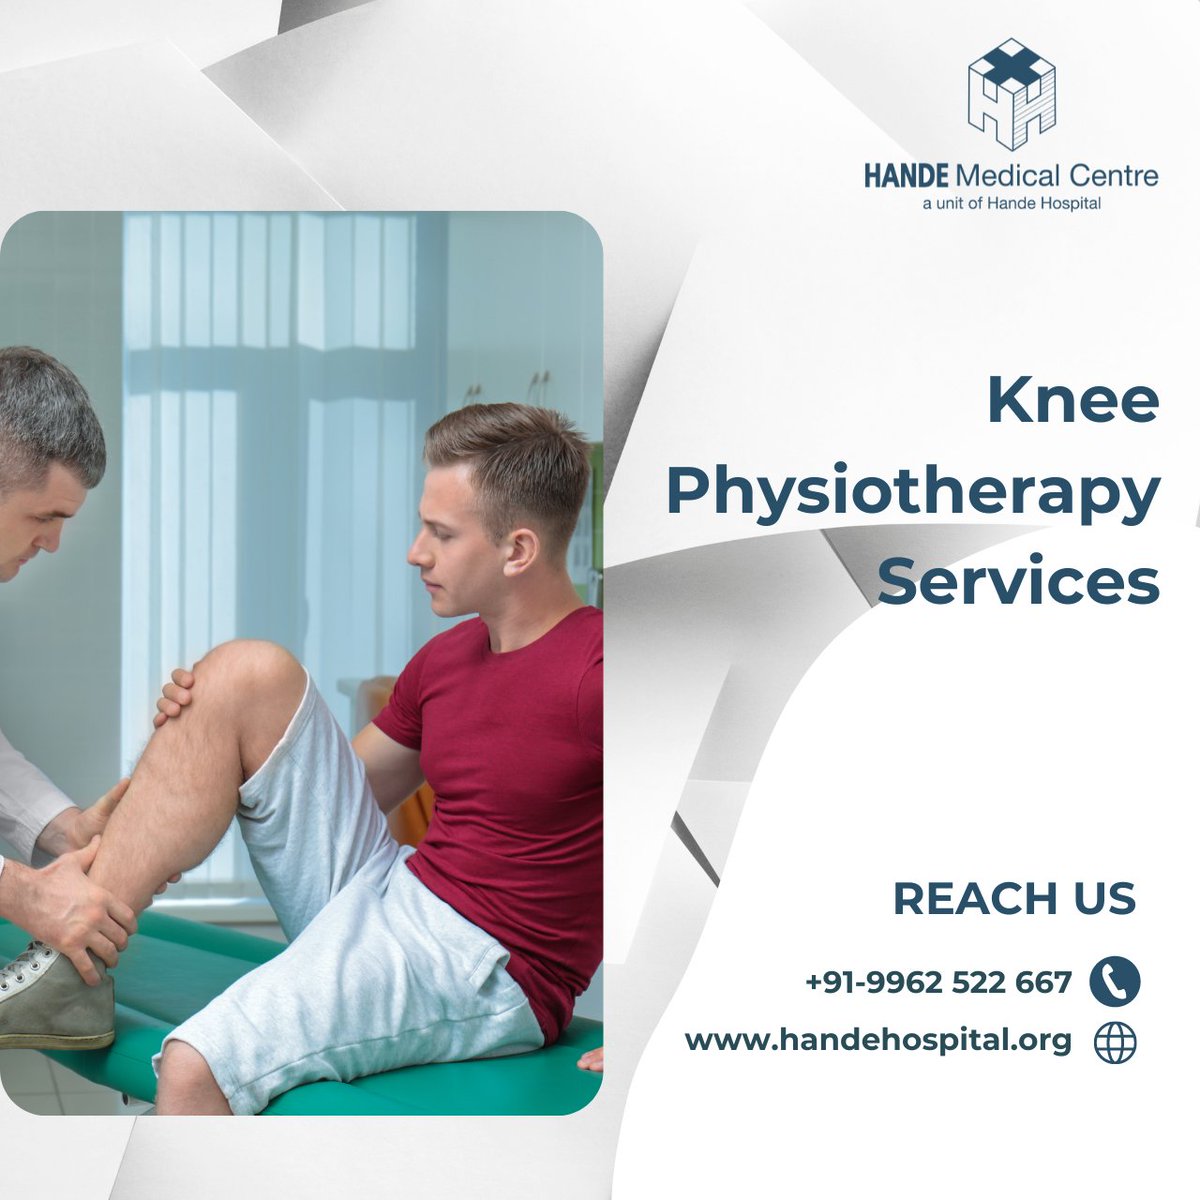 The goal of physiotherapy is to give maximum flexibility and mobility for your knee joint.
+91-99625 22667 / handehospital.org
#handehospital #physiotherapy #physiotherapyservices #physiotherapycare #kneereplacement #orthopedicsurgery #kneepain #orthopedics